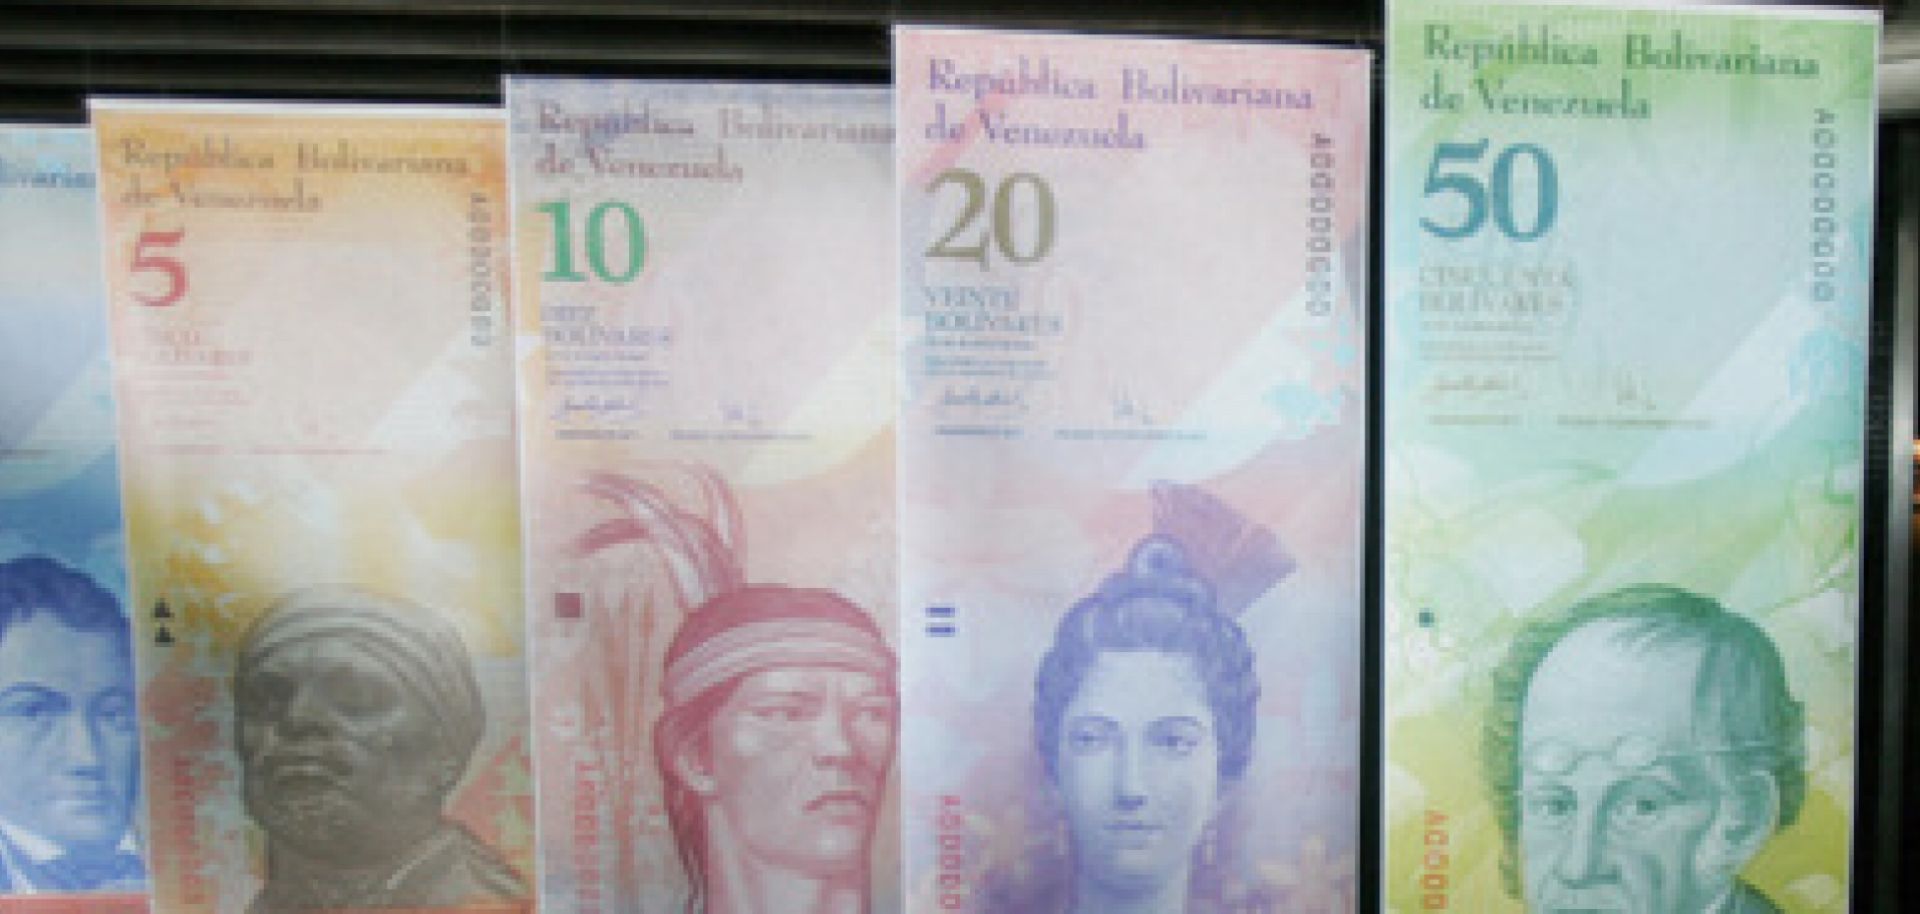 Large reproductions of the Venezuelan bolivar on display in Caracas